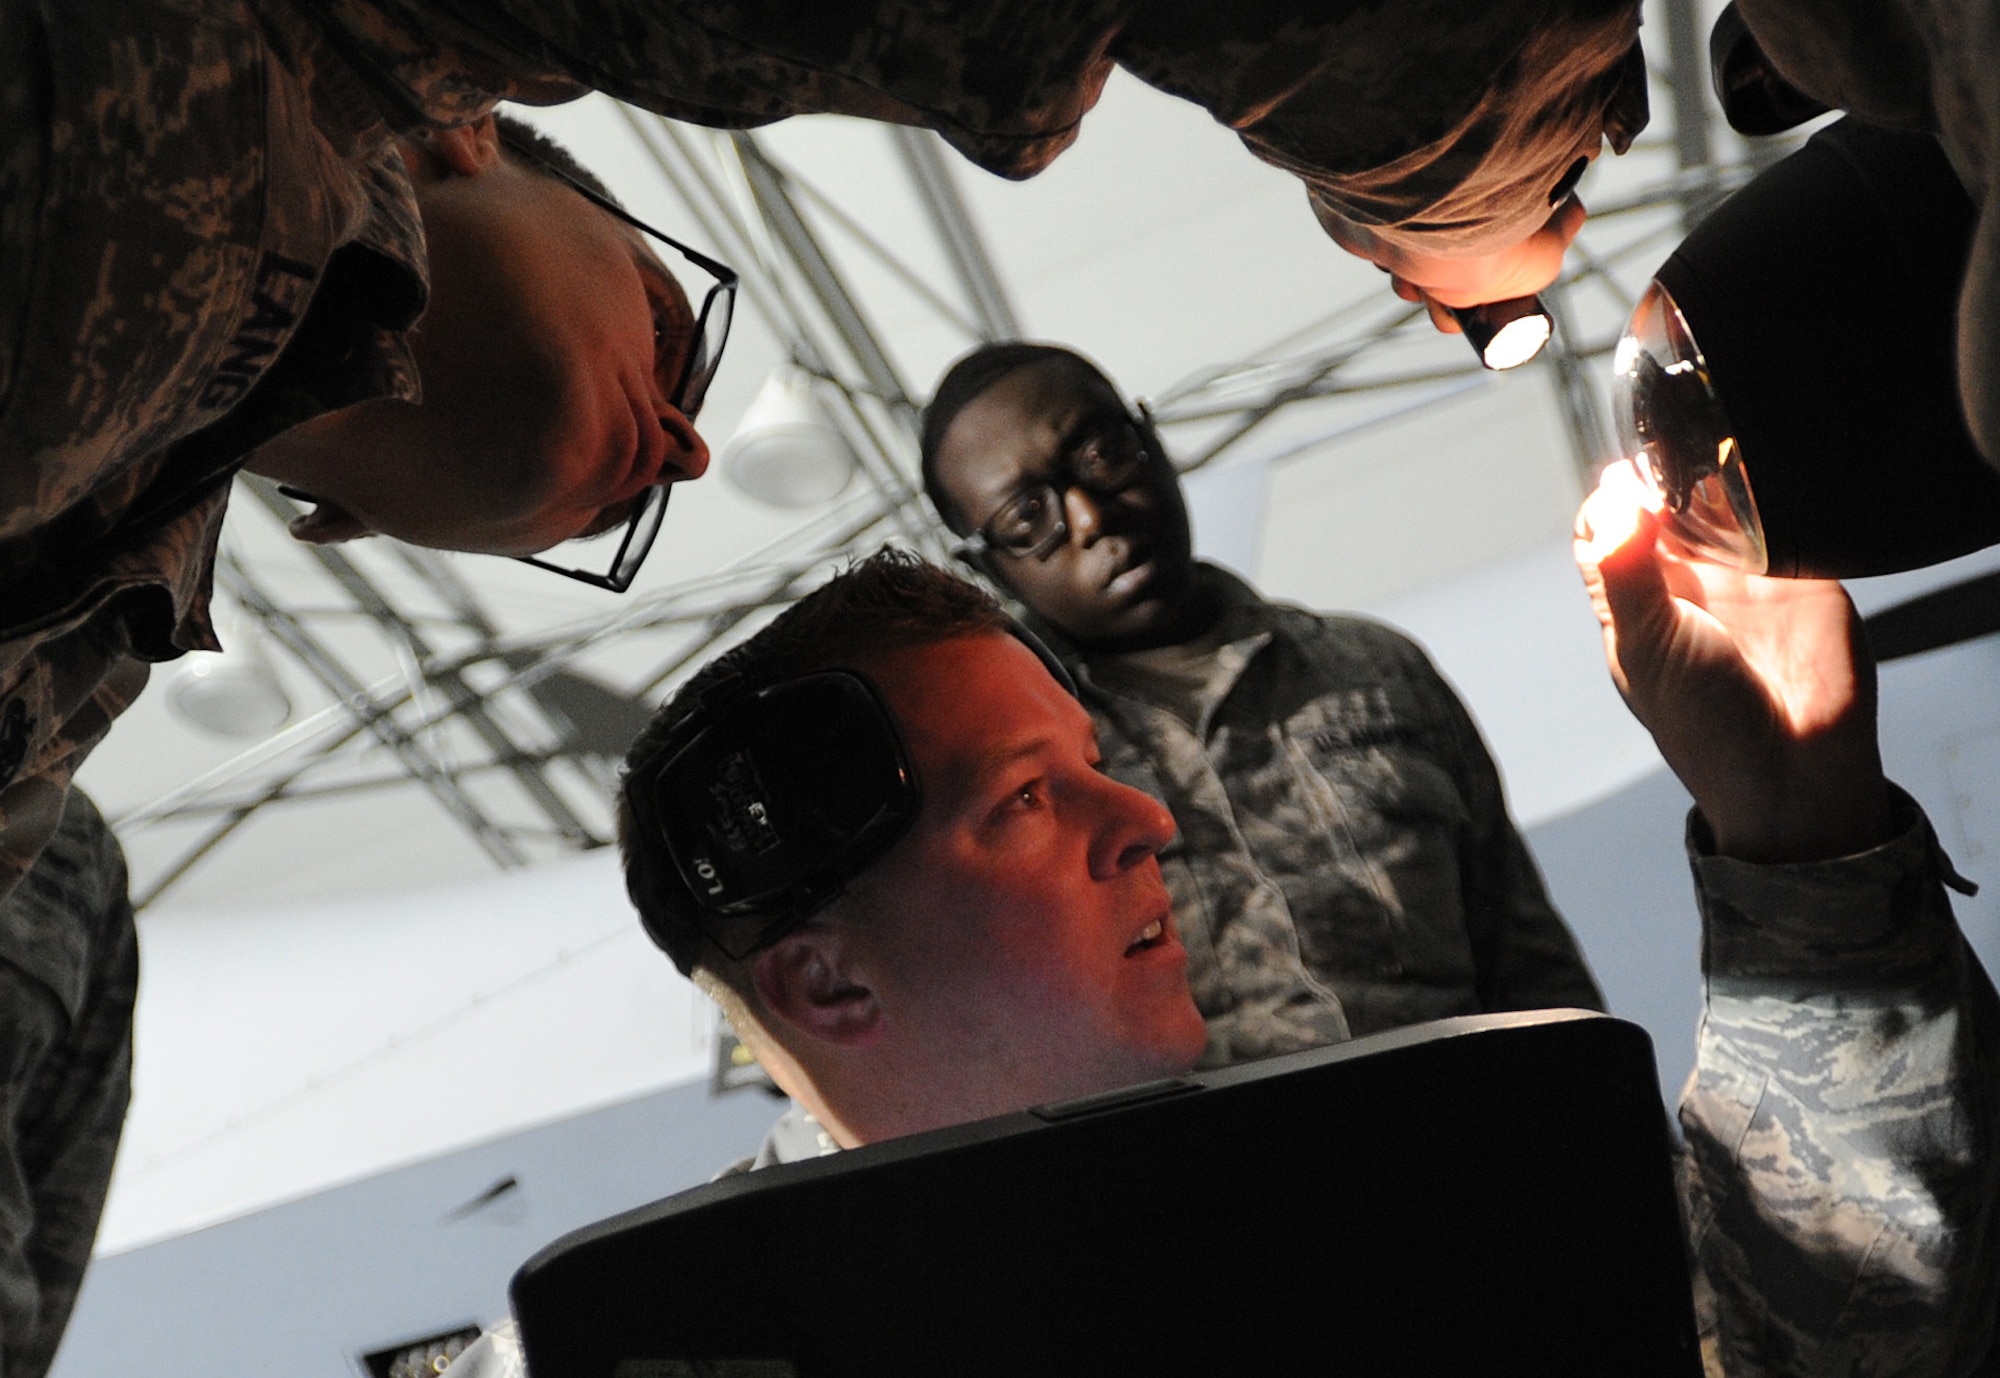 Airmen from the 432nd Aircraft Maintenance Squadron Tiger Aircraft Maintenance Unit weapons load crew inspect an AGM- 114 Hellfire missile loaded on an MQ-9 Reaper prior to launch at Creech Air Force Base, Nev., May 12, 2014. The 432nd Maintenance Group has continuously exceeded the RPA standard mission capable rate of 86 percent set by Air Combat Command through sound maintenance practices. Mission capable means the aircraft has no supply or maintenance issues preventing it from successfully completing a mission. (U.S. Air Force photo by Senior Master Sgt. C.R./Released)